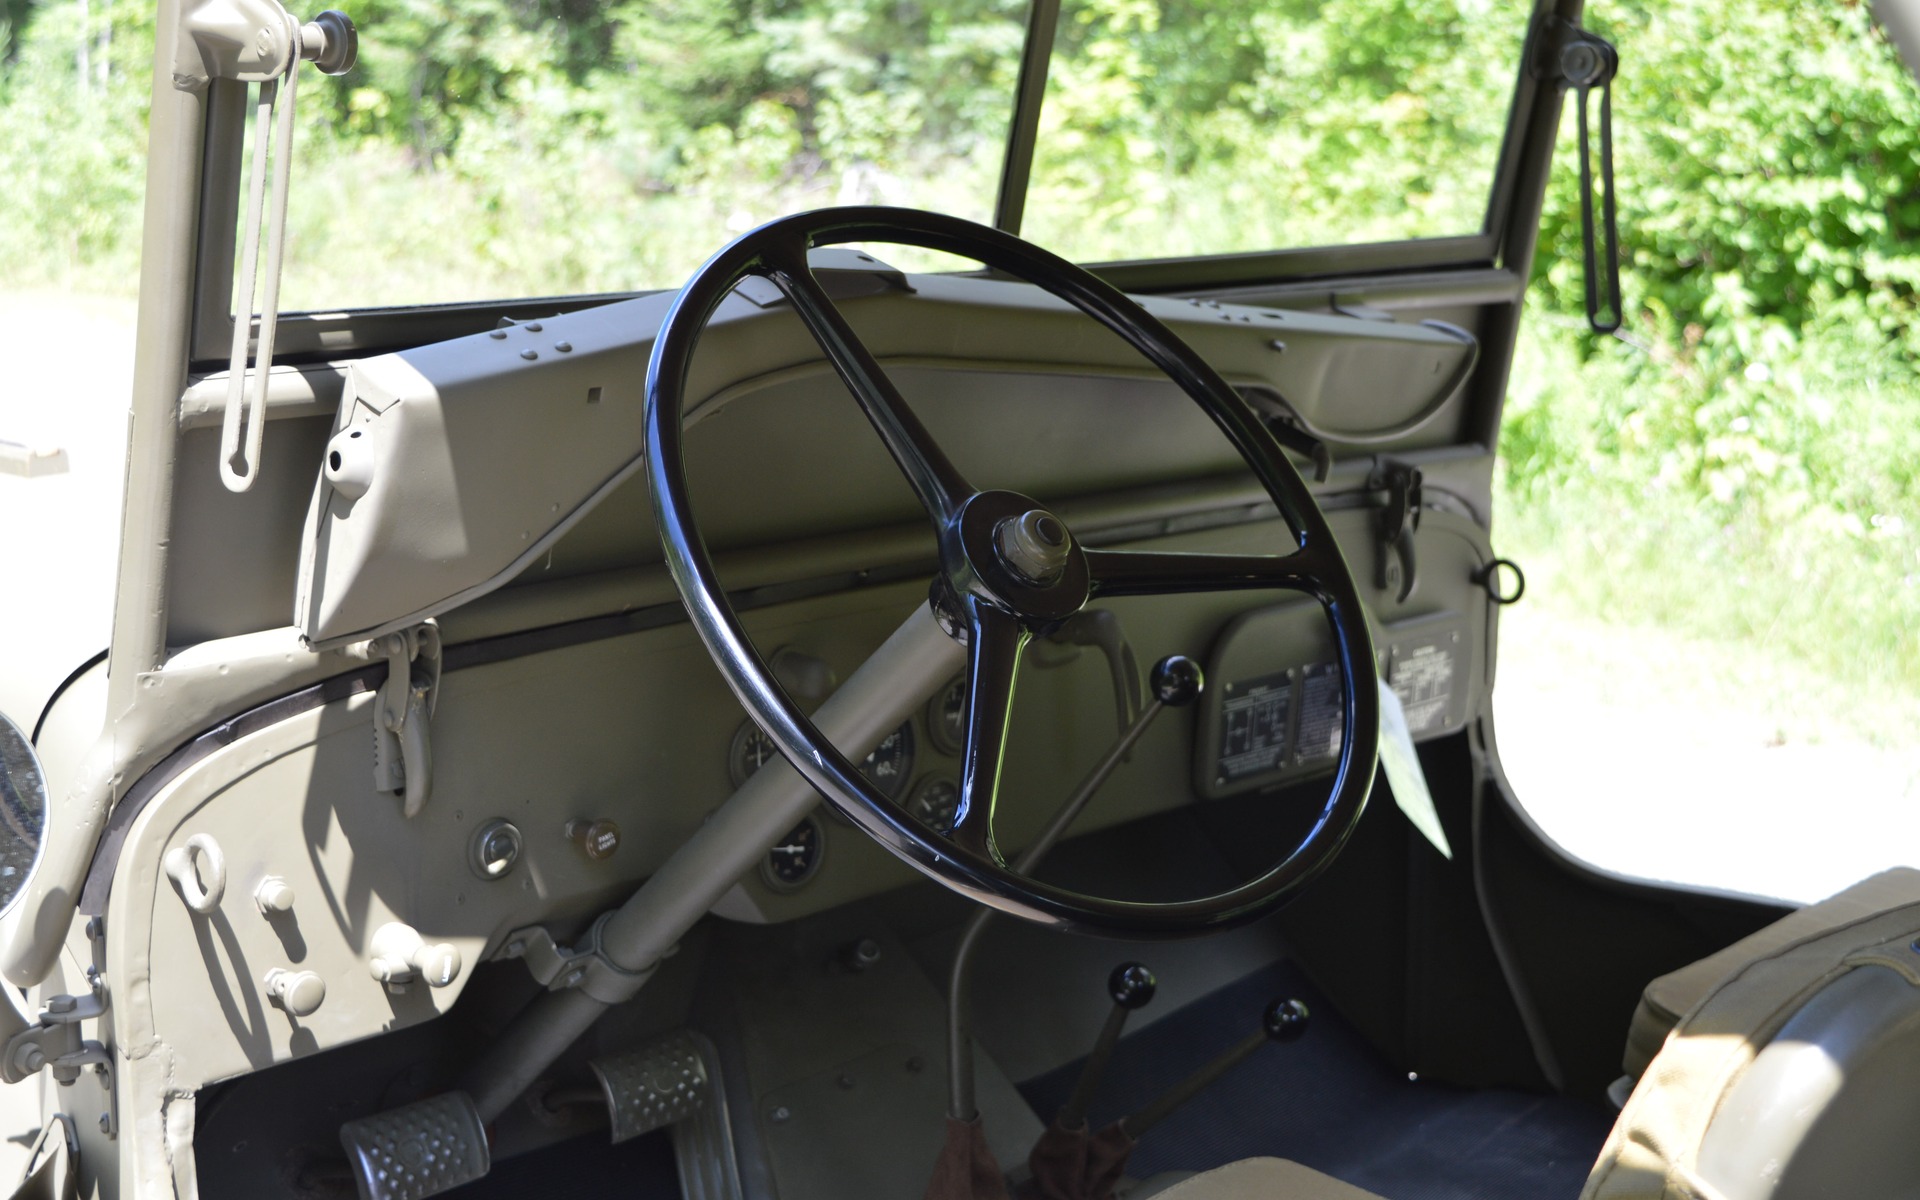 Jeep Willys 1944